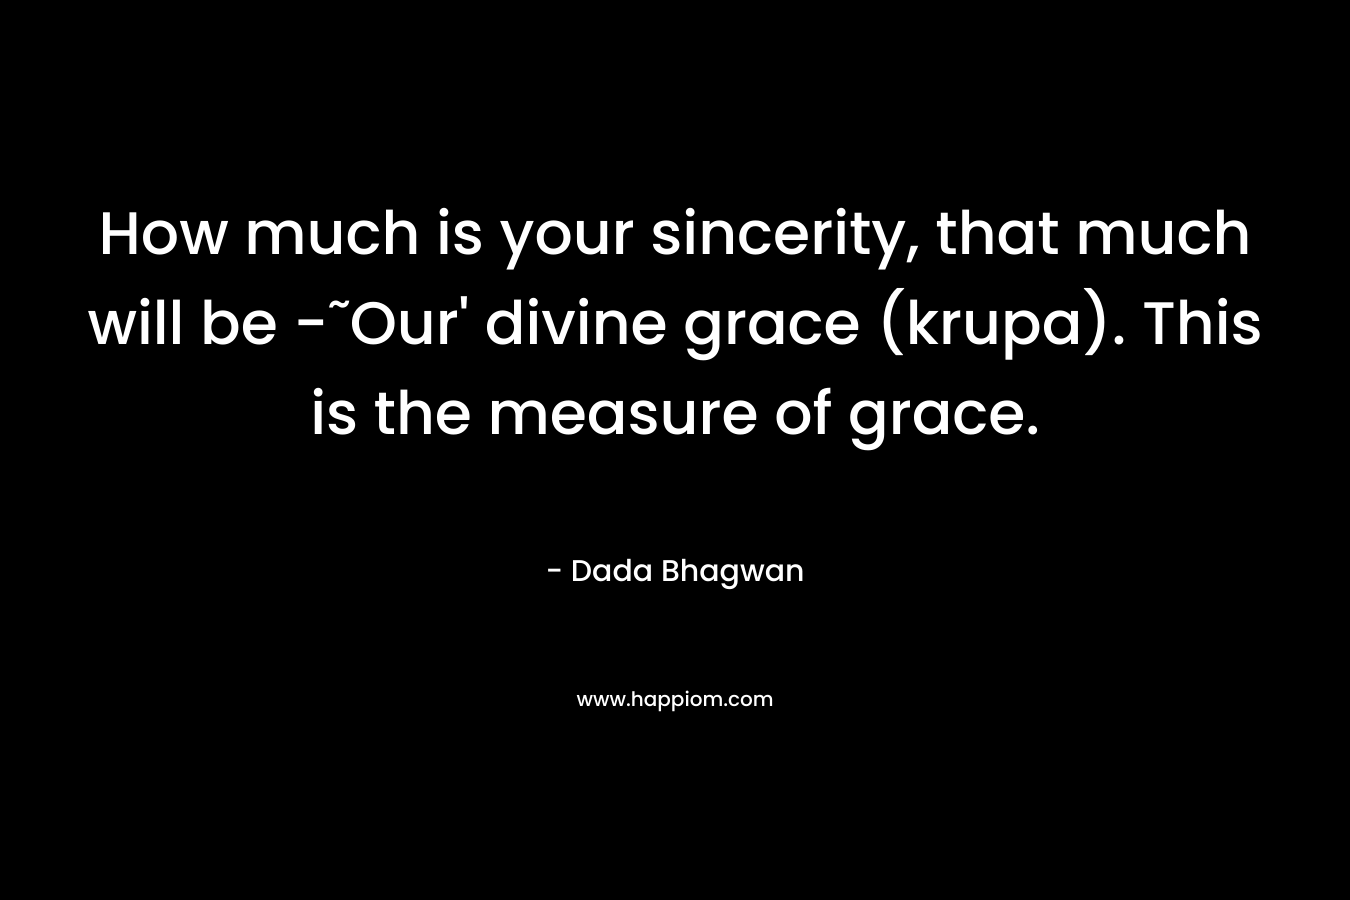 How much is your sincerity, that much will be -˜Our' divine grace (krupa). This is the measure of grace.